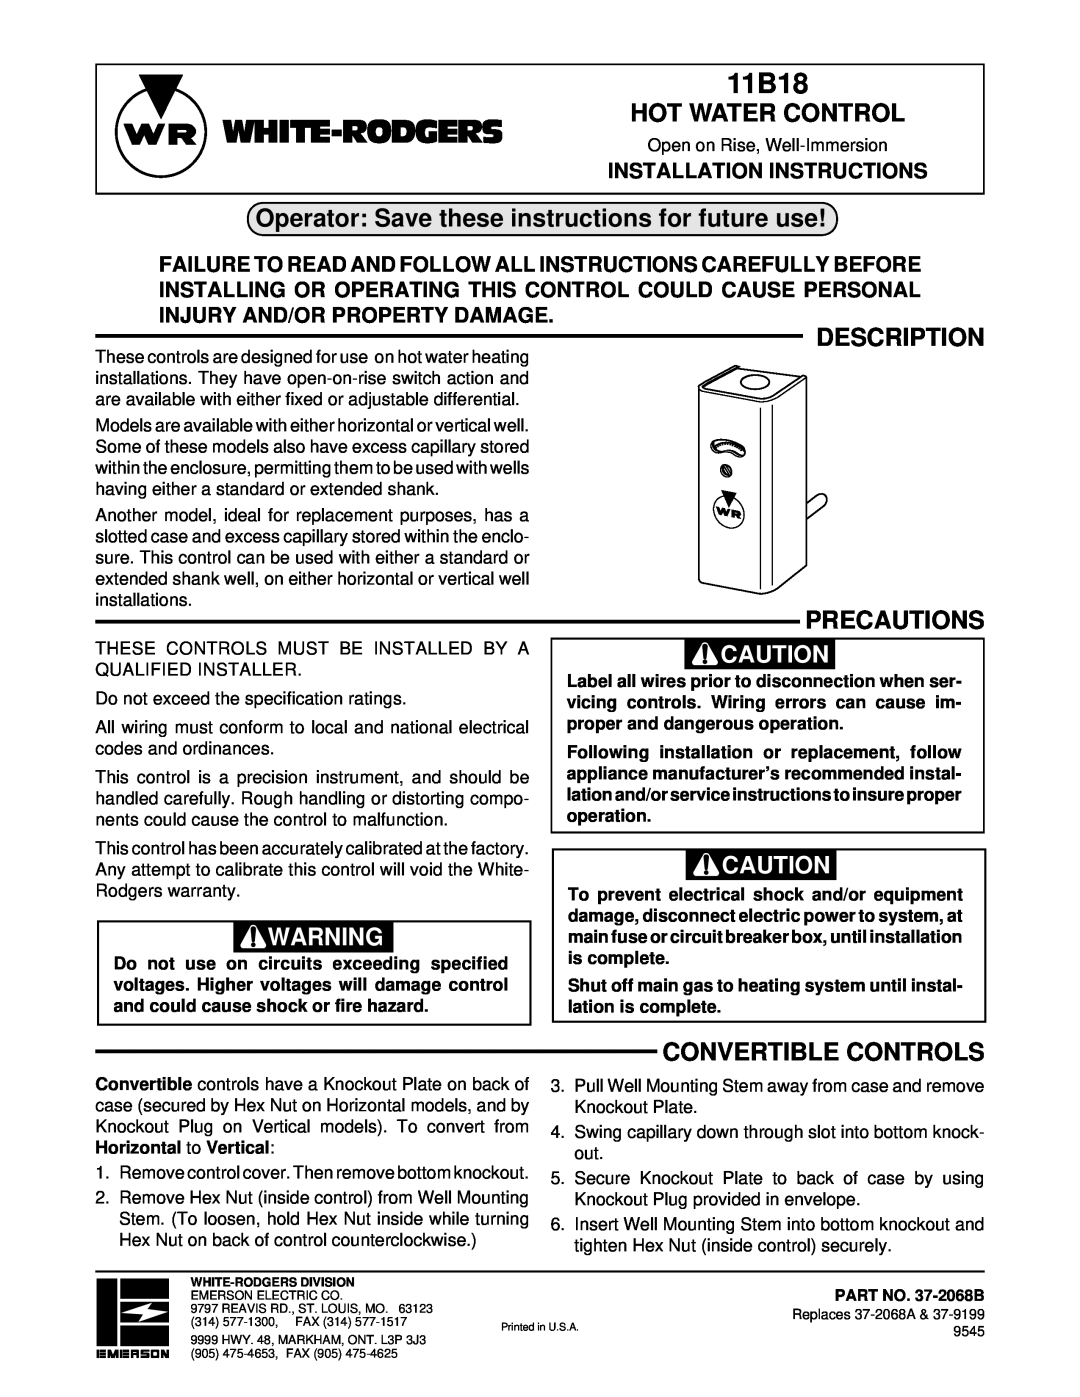 White Rodgers 11B18 installation instructions White-Rodgers, Hot Water Control, Description, Precautions 